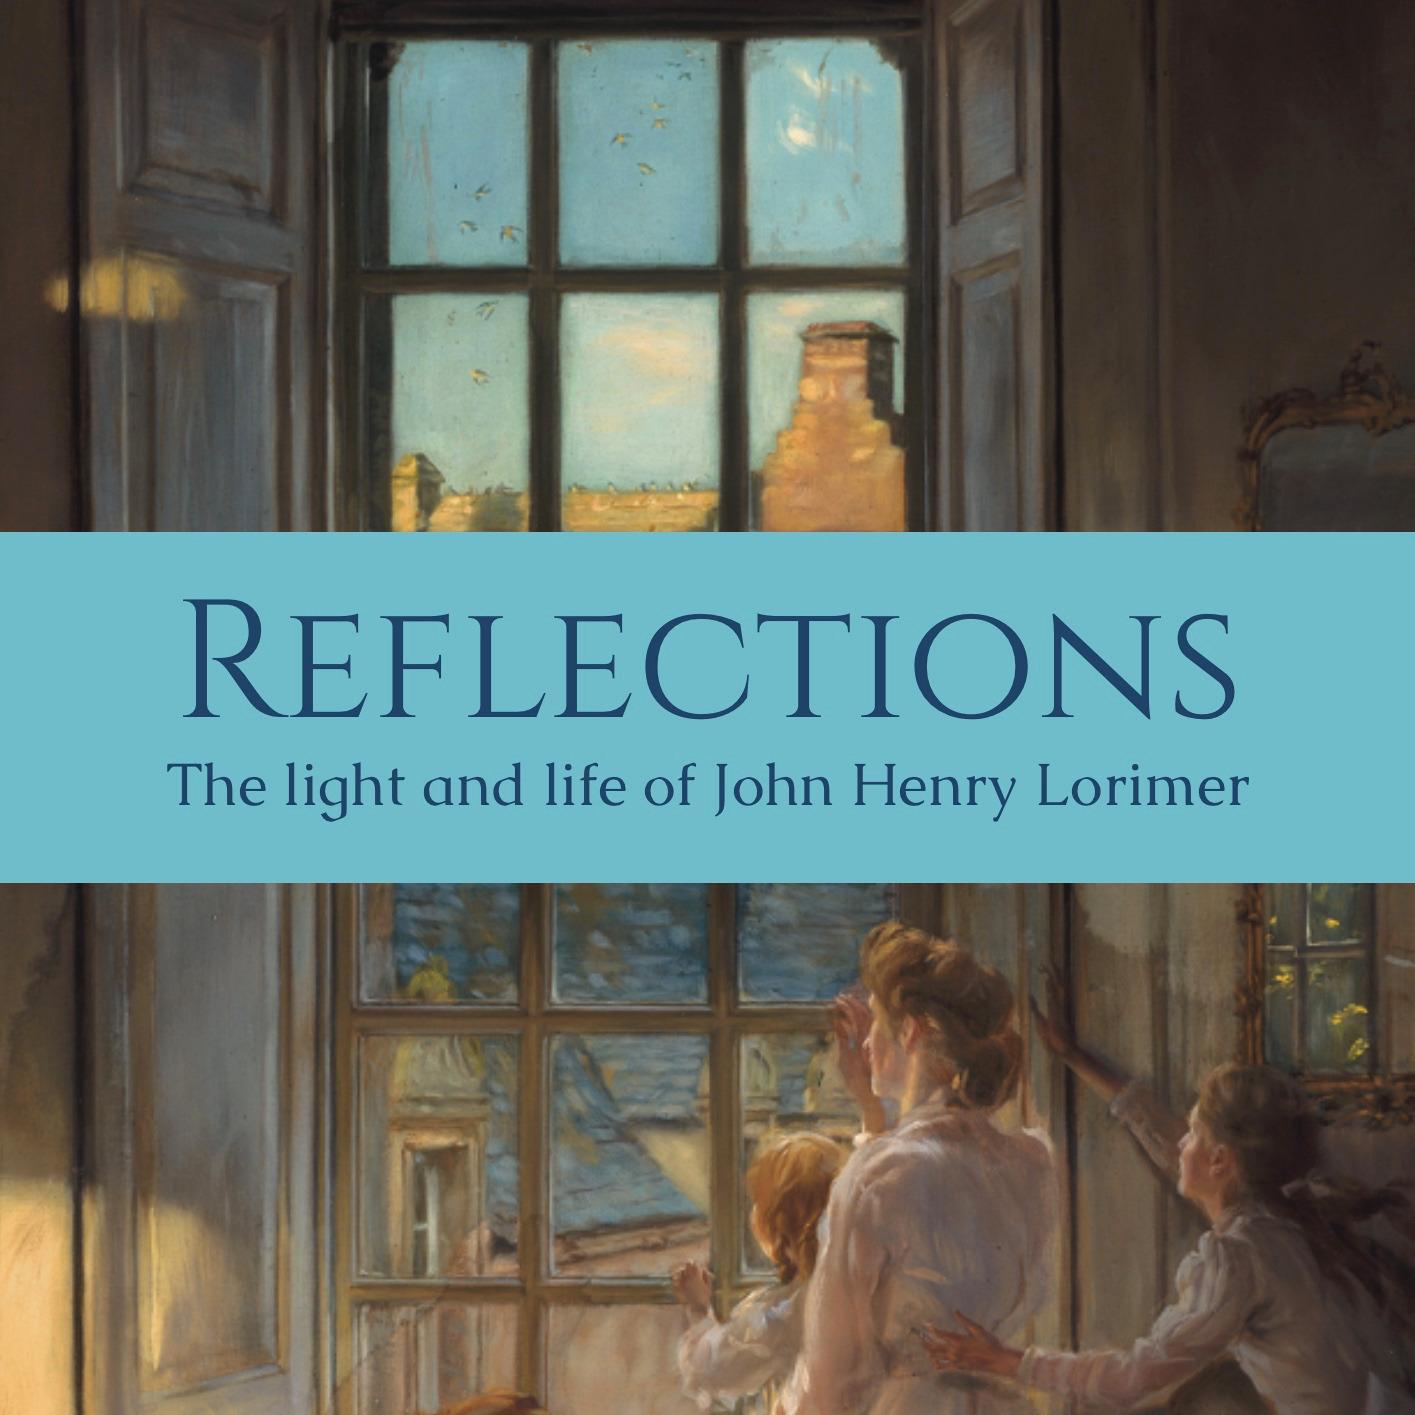 Reflections: The light and life of John Henry Lorimer